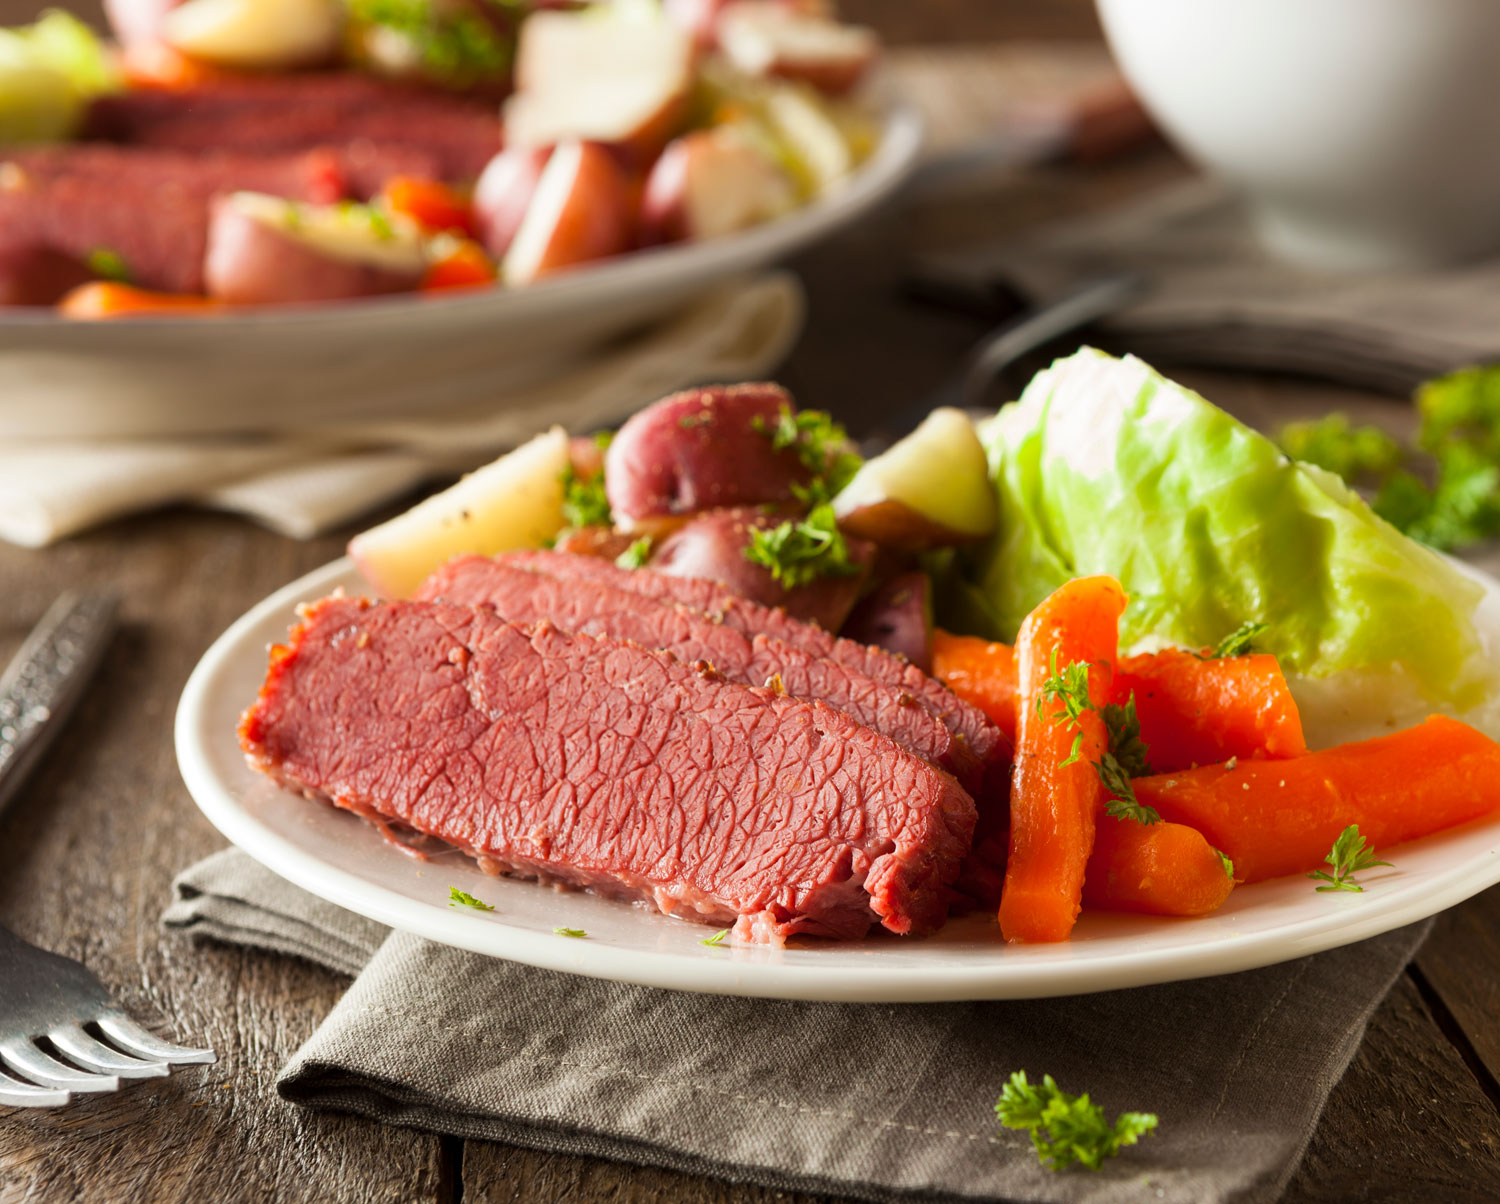 Preparing for St. Patrick's Day this year? Try corning a beef